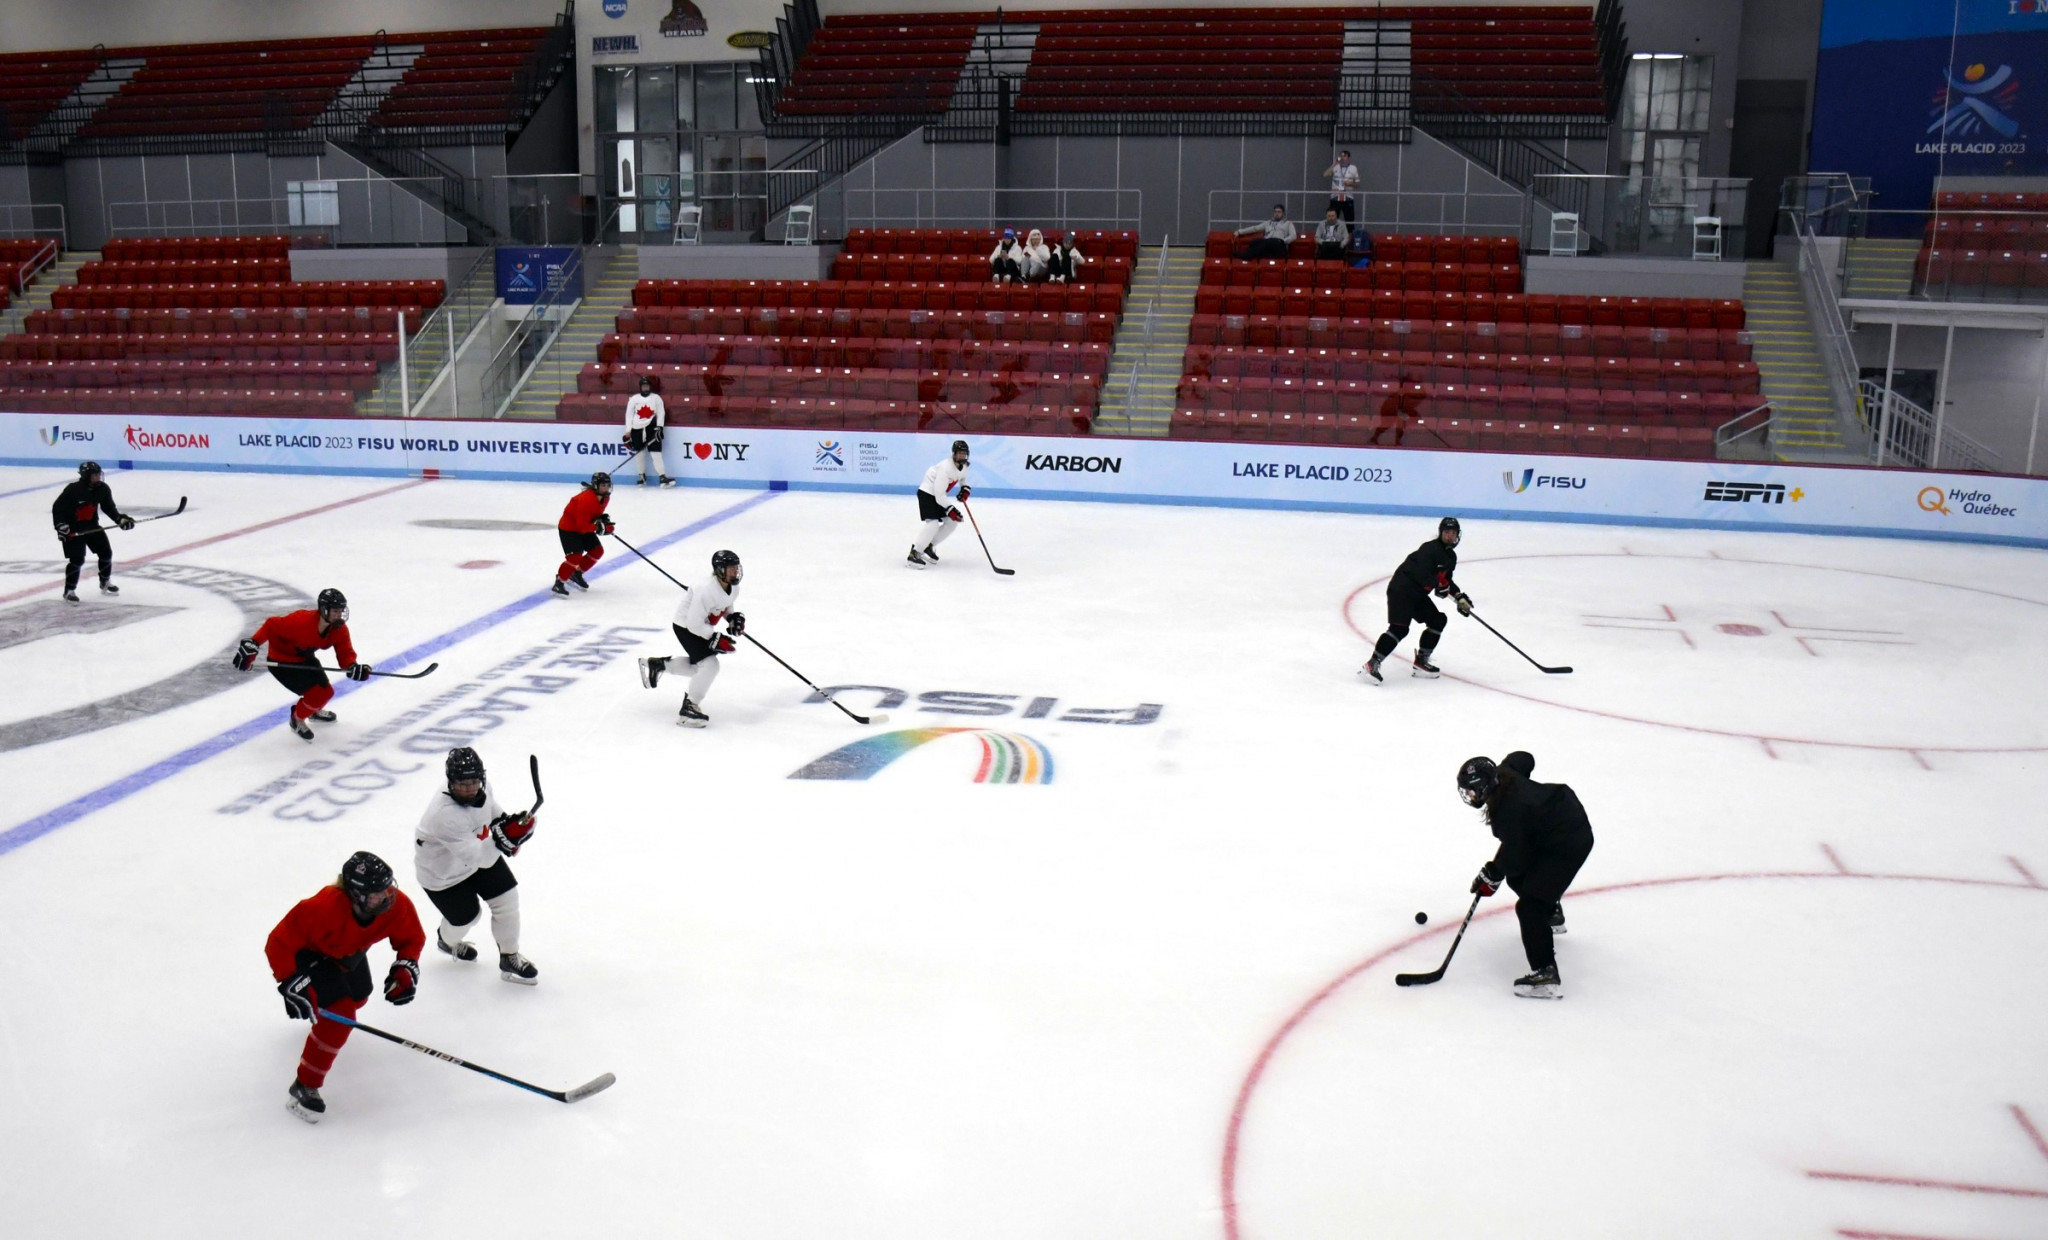 Defending champions missing as Ice hockey set to begin Lake Placid 2023 action prior to Opening Ceremony